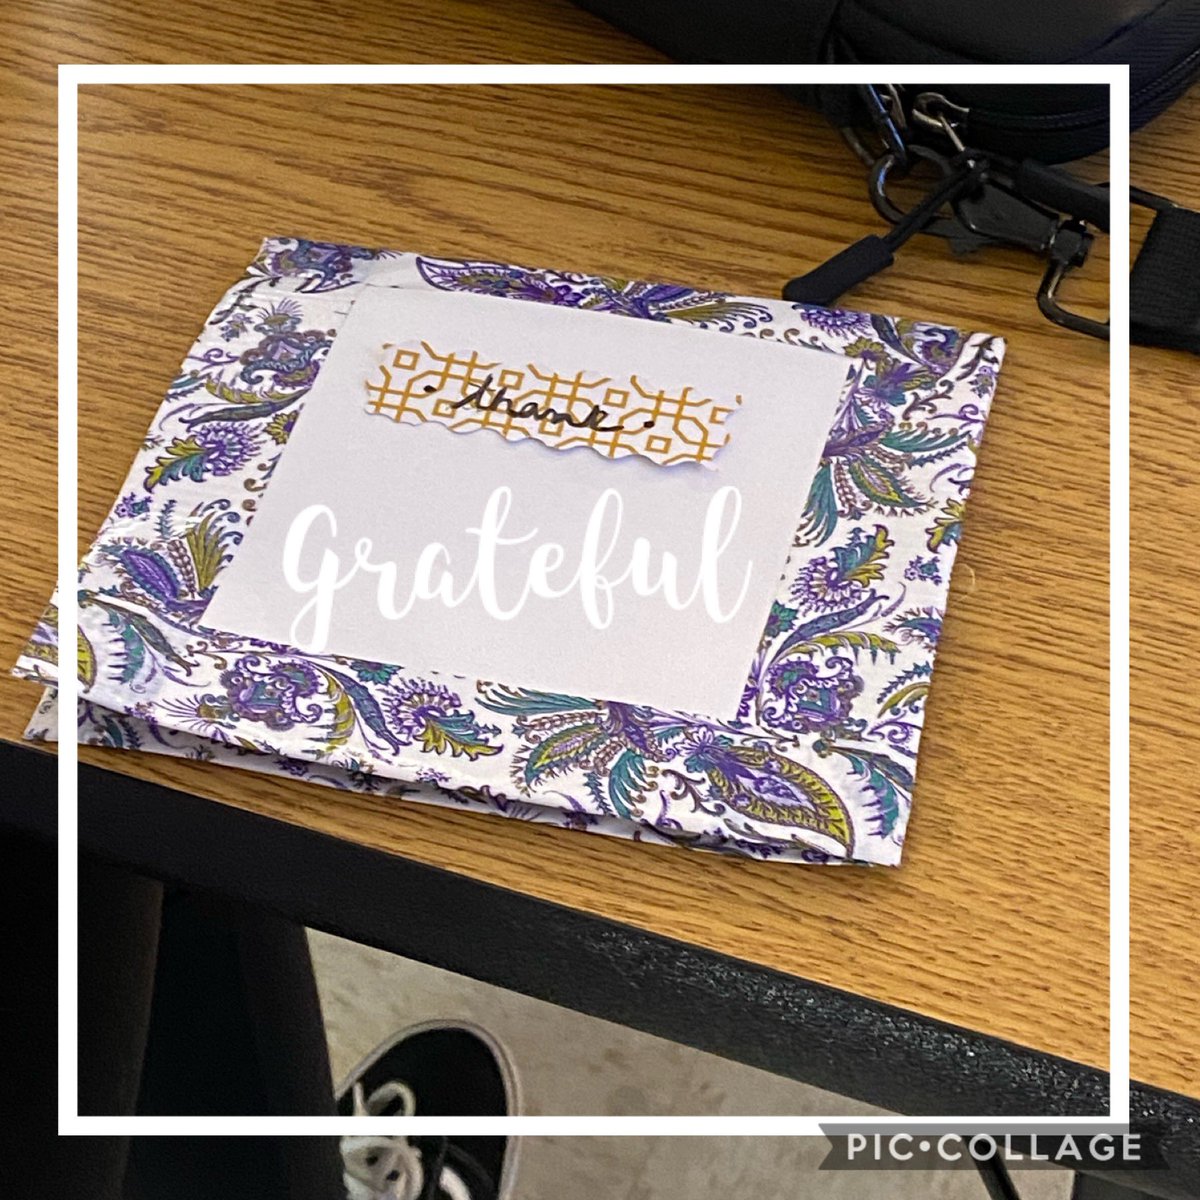 Grateful students making thank you cards 😊#Thankful #gratefulstudents #Middleschool